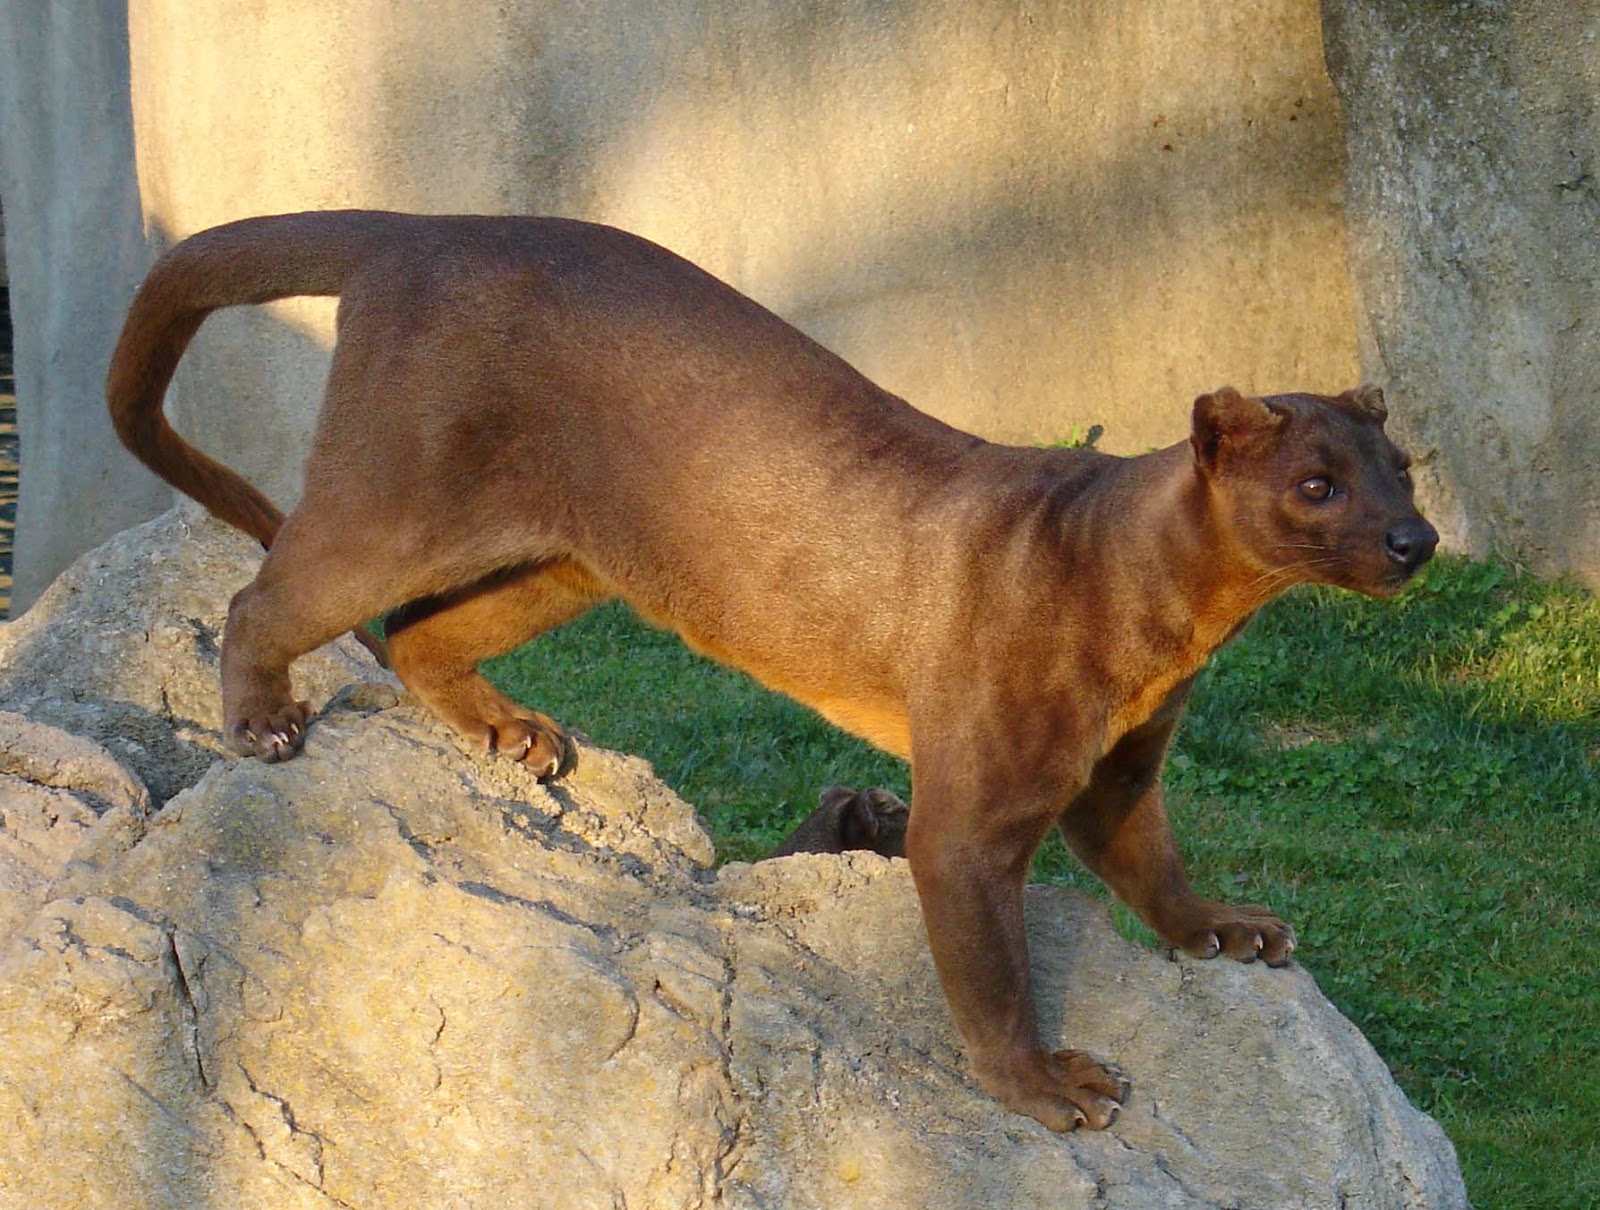 Animals You May Not Have Known Existed - The Fossa